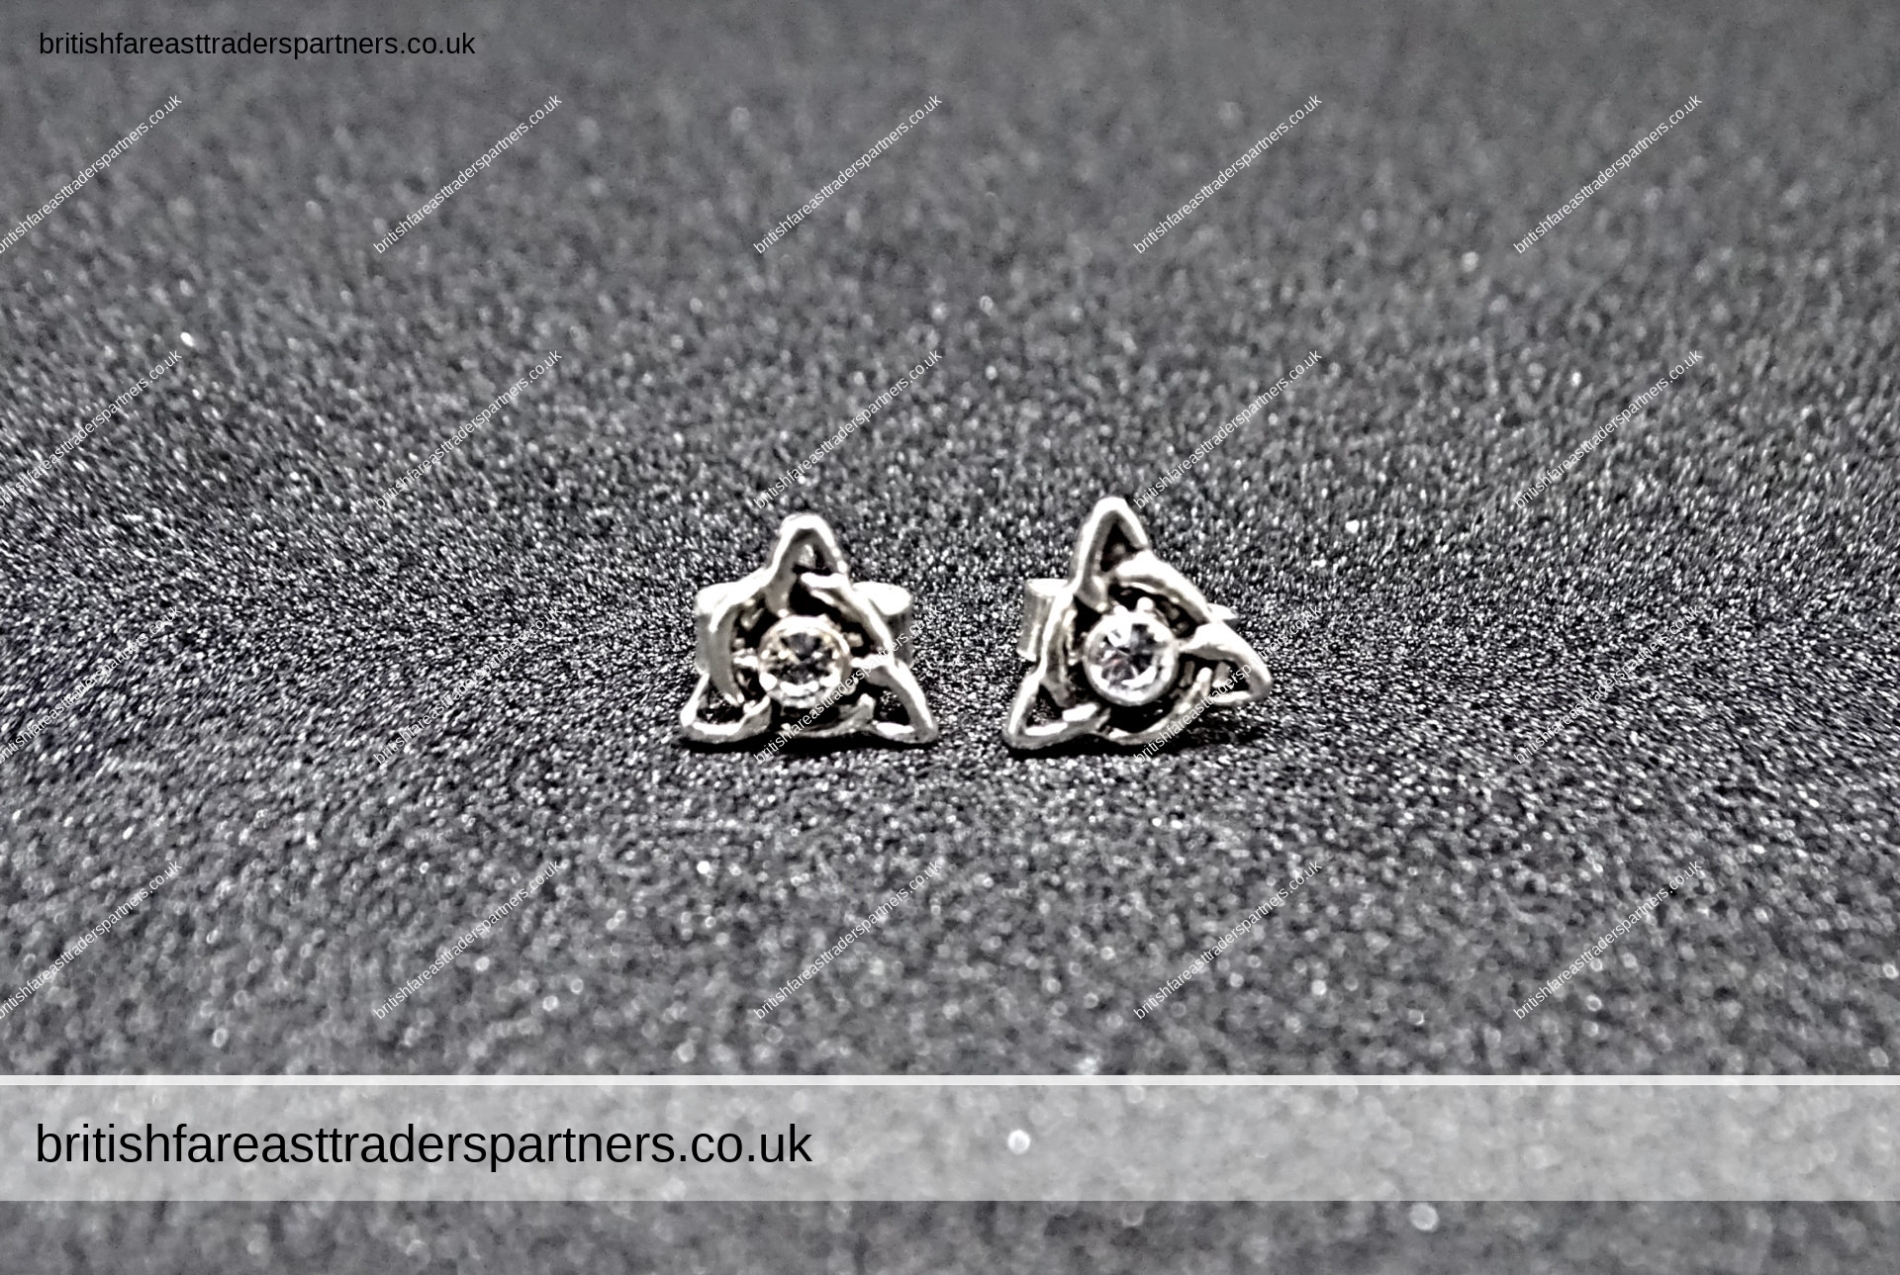 CELTIC KNOT TRIANGLE STERLING SILVER STUD EARRINGS EARRINGS | FINE JEWELLERY | STERLING SILVER | IRISH / IRELAND | CELTIC KNOT | HERITAGE | CELTIC HERITAGE |  CELTIC JEWELLERY | FASHION |  LIFESTYLE & CULTURE